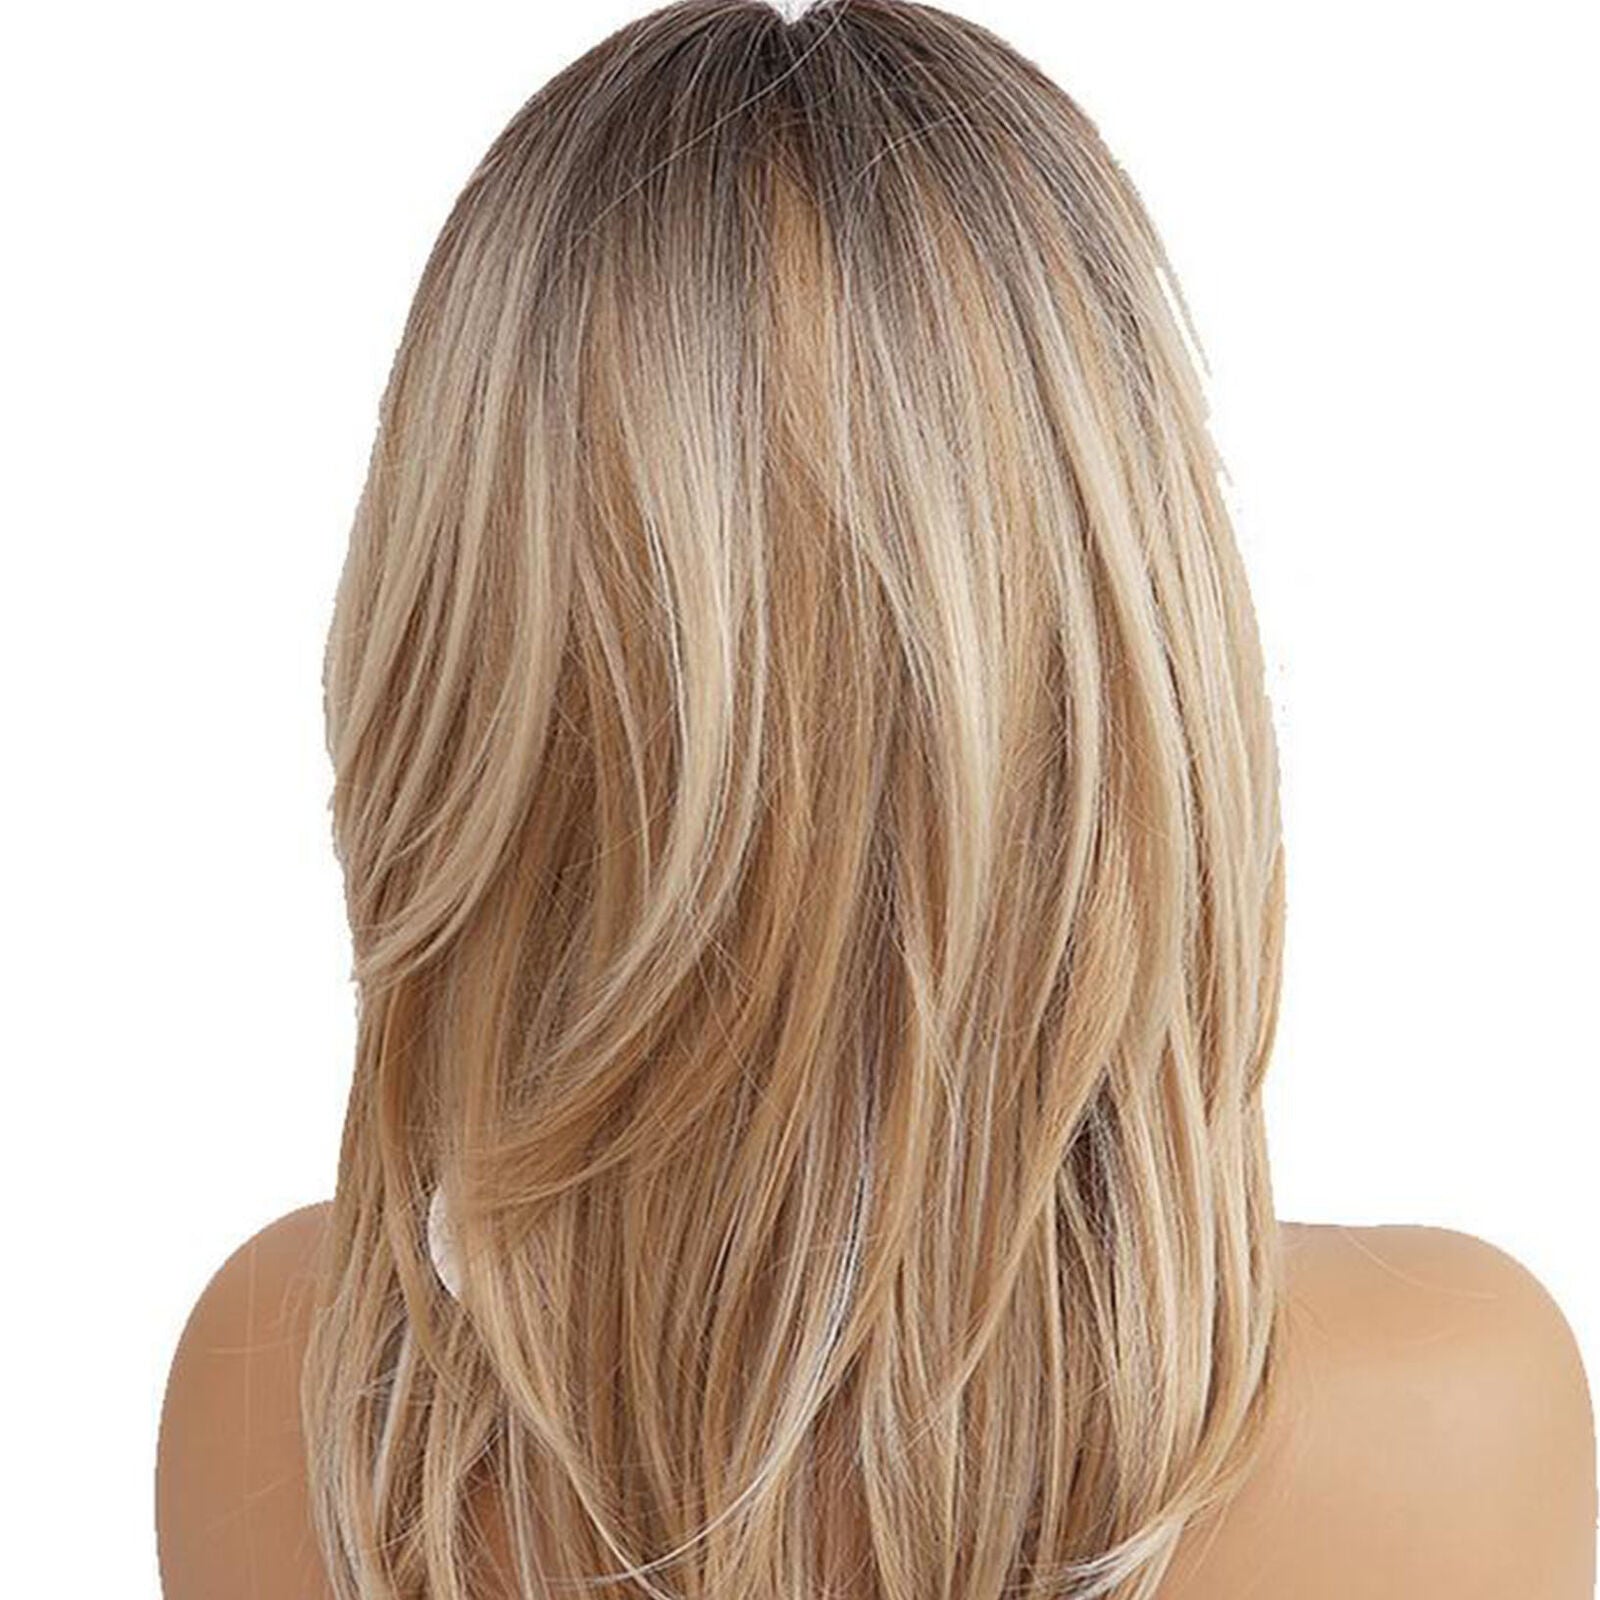 Brown Natural Blonde Wavy Ombre Synthetic Hair Wigs With Bangs For Women New